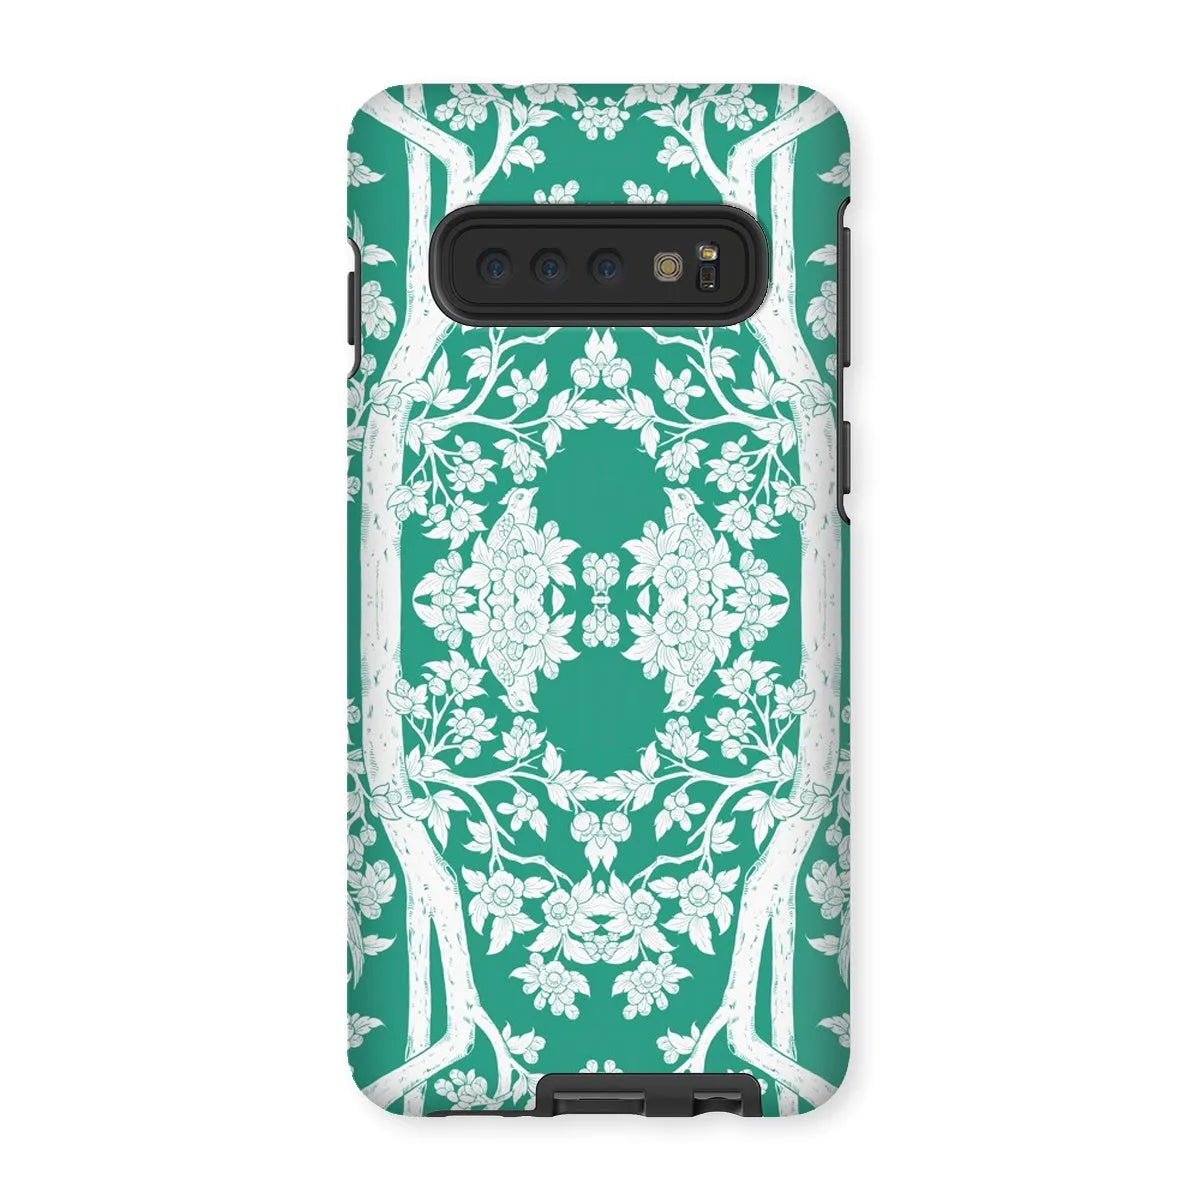 Aviary Green Aesthetic Pattern Art Phone Case - Samsung Galaxy S10 / Matte - Mobile Phone Cases - Aesthetic Art